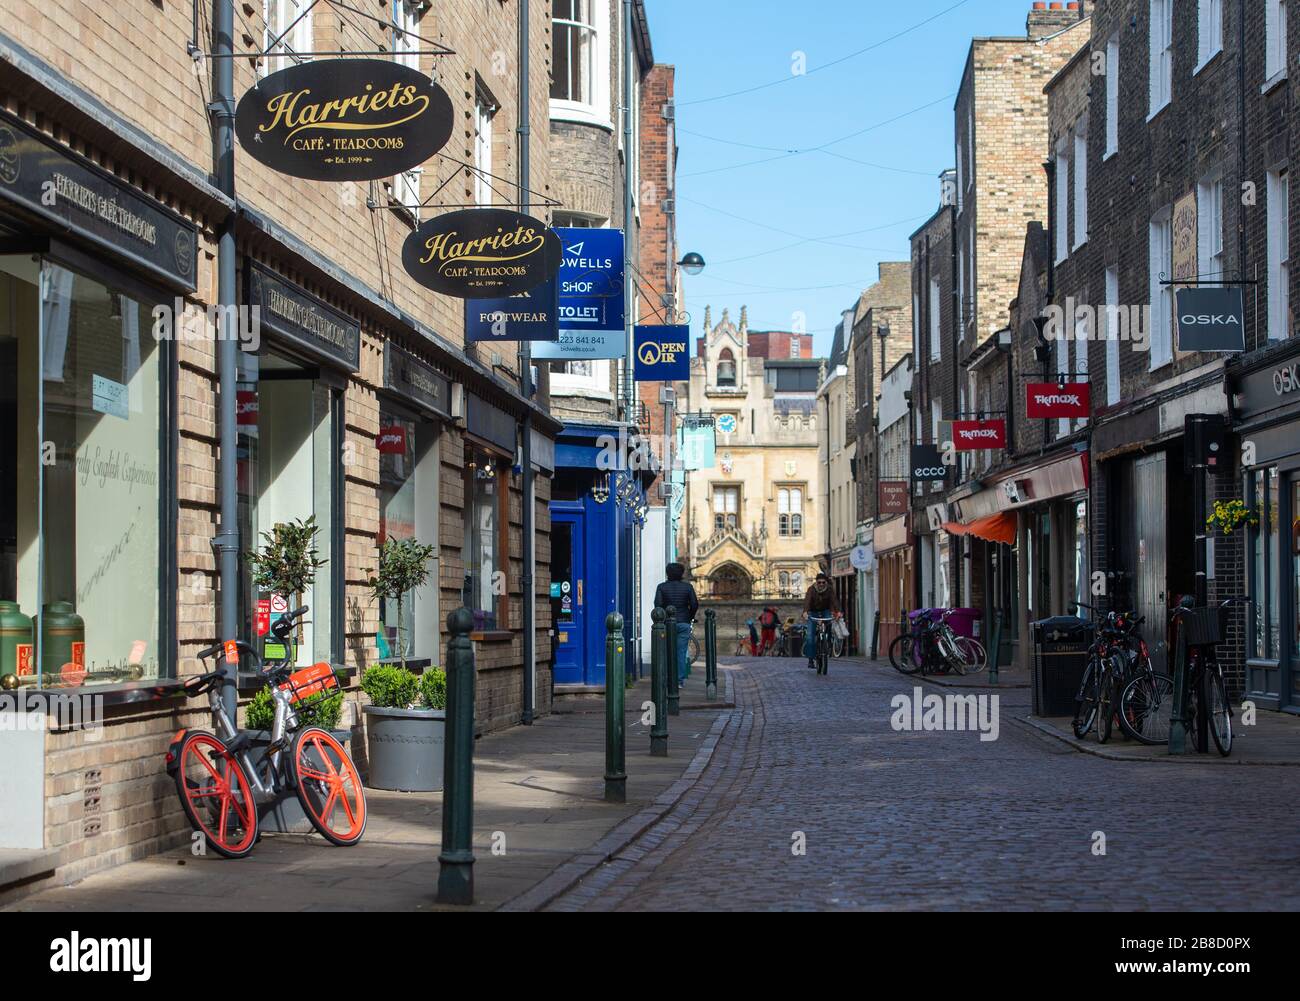 A view of Green Street in Cambridge, after Prime Minister Boris Johnson ordered pubs, restaurants, leisure centres and gyms across the country to close as the Government announced unprecedented measures to cover the wages of workers who would otherwise lose their jobs due to the coronavirus outbreak. Stock Photo